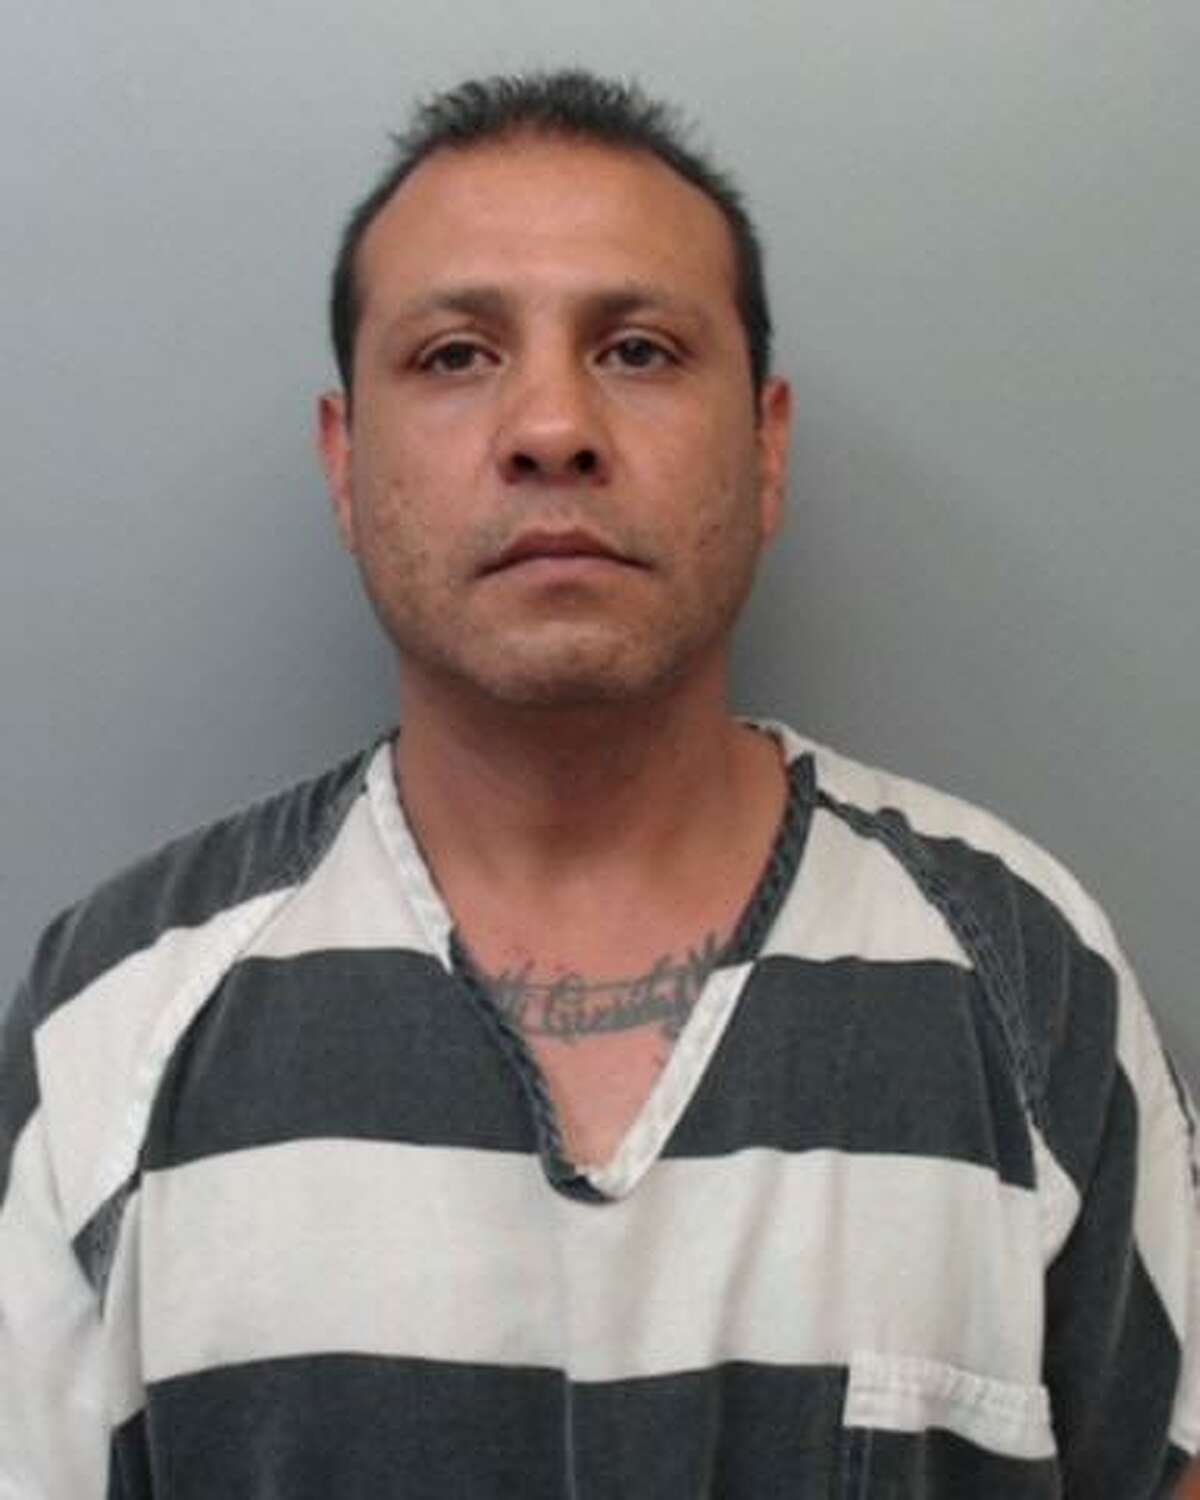 Joseph Segovia, 39, was charged with assault, family violence.